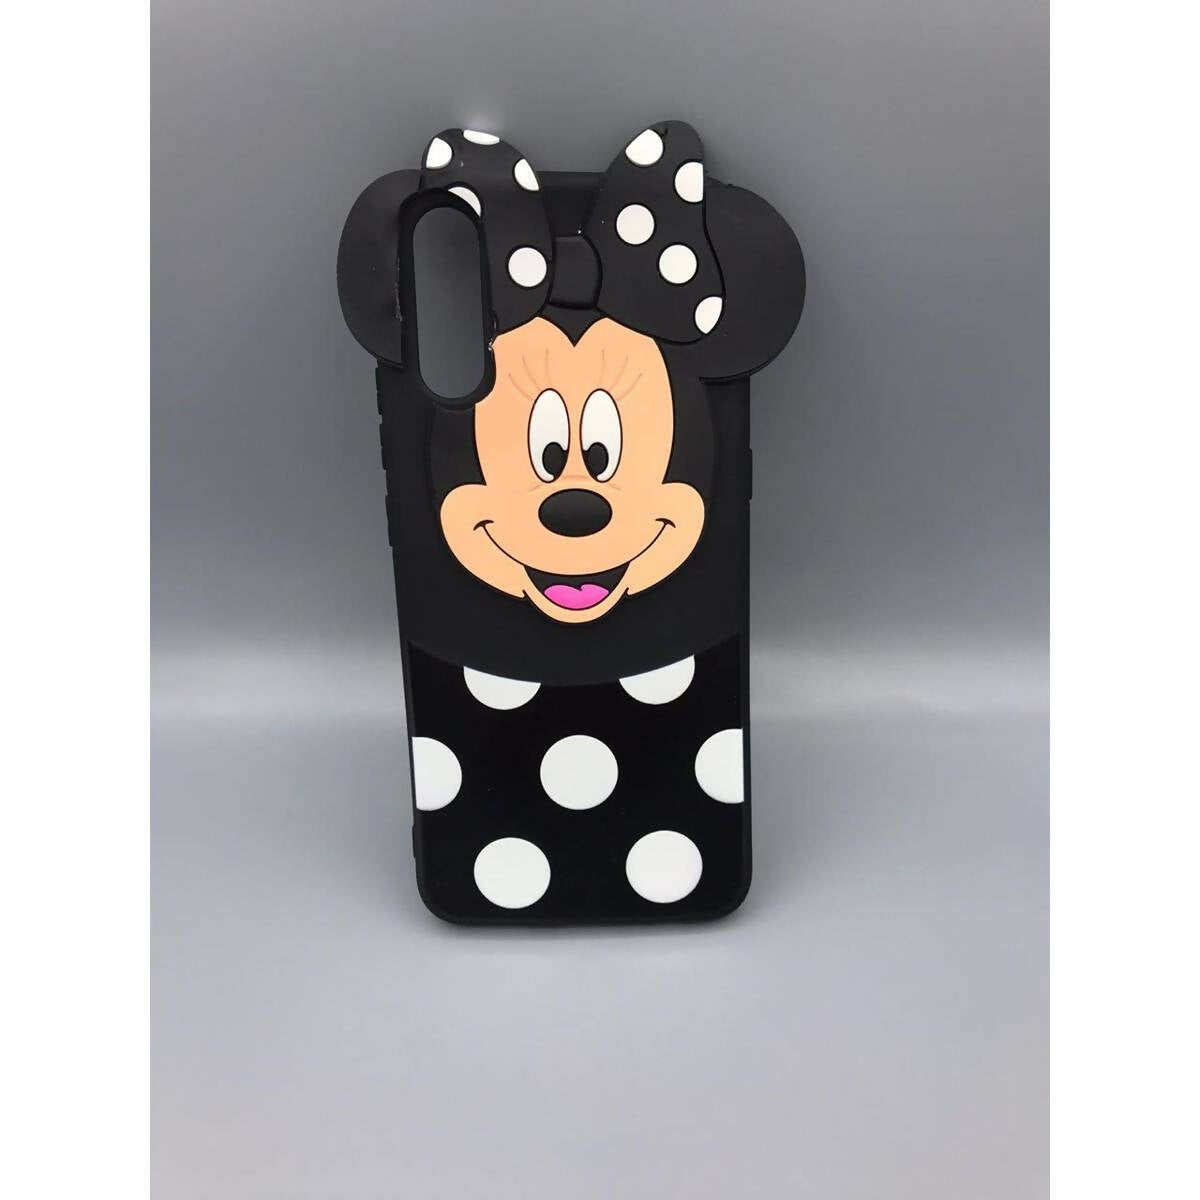 Vivo_ S1 Pro / Y51 - Cute & Stylish Micky Mouse Back Cover Case - Made with High Quality Silicone Rubber - Fancy And Girlish Cover for Girls, Ladies and Kids